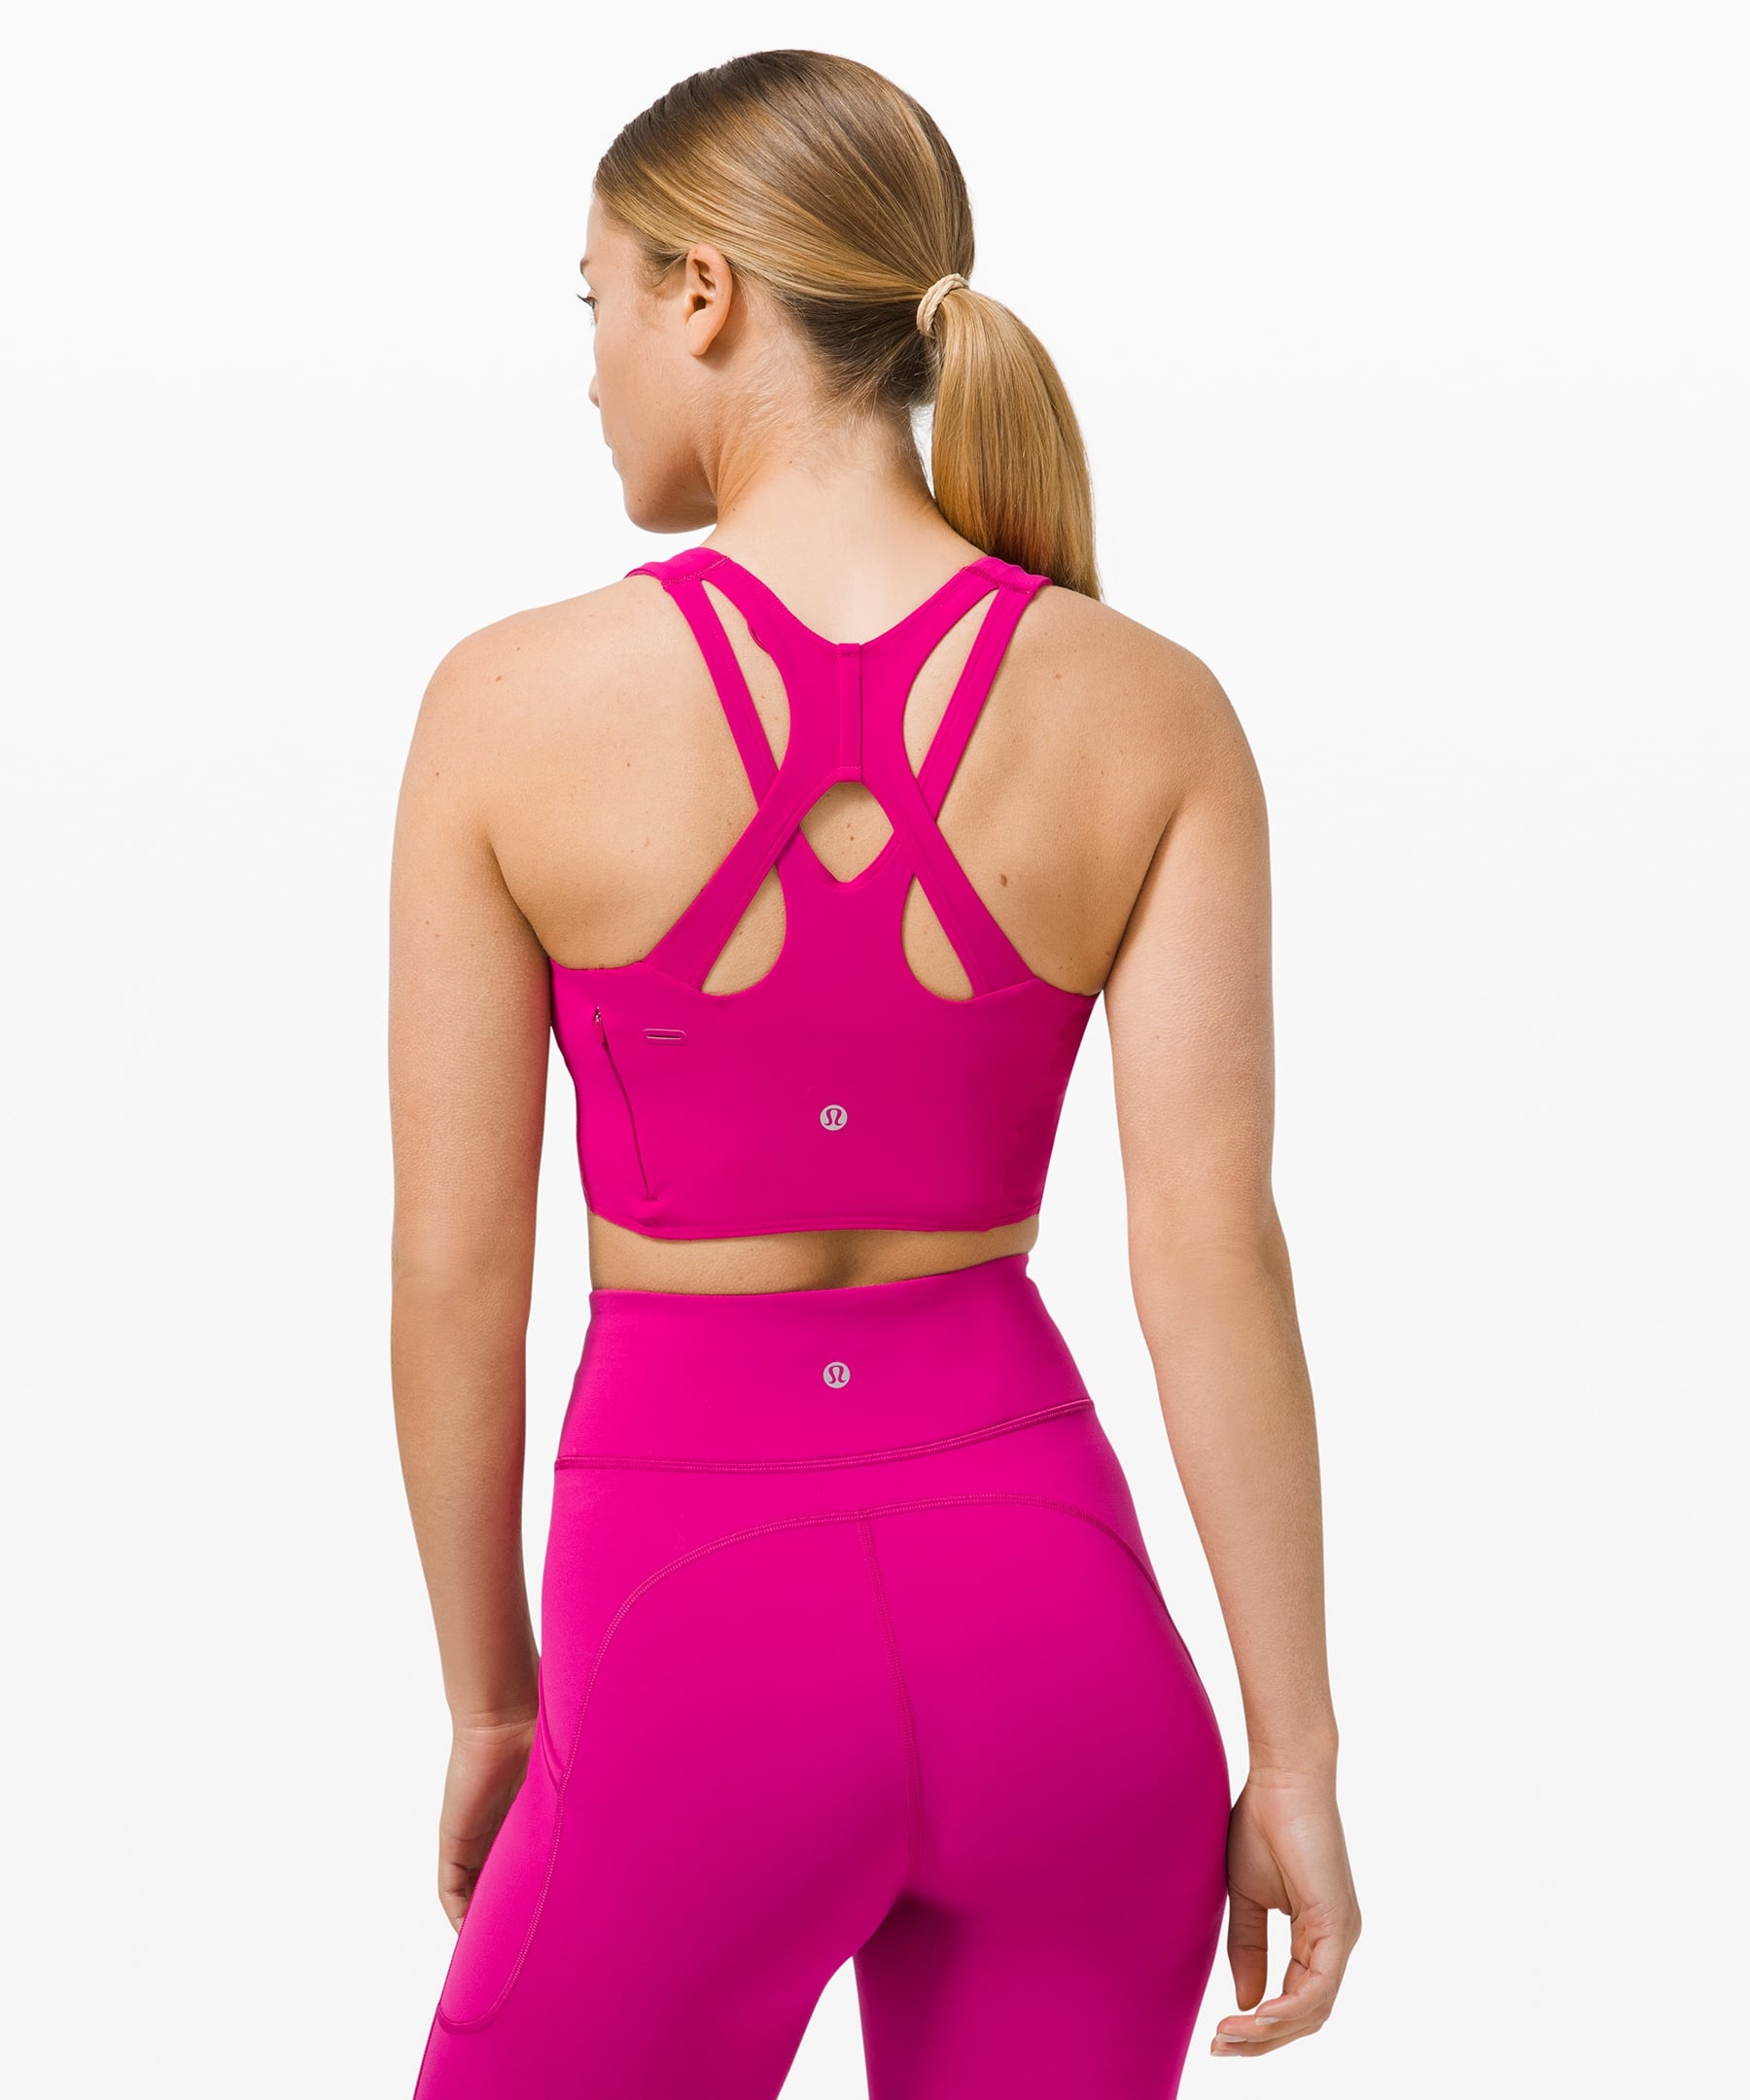 FIRST LULU OUTFIT! I understand the addiction now but I have to say, I  prefer the sports bras over the leggings (maybe I'm doing it wrong?) :  r/lululemon